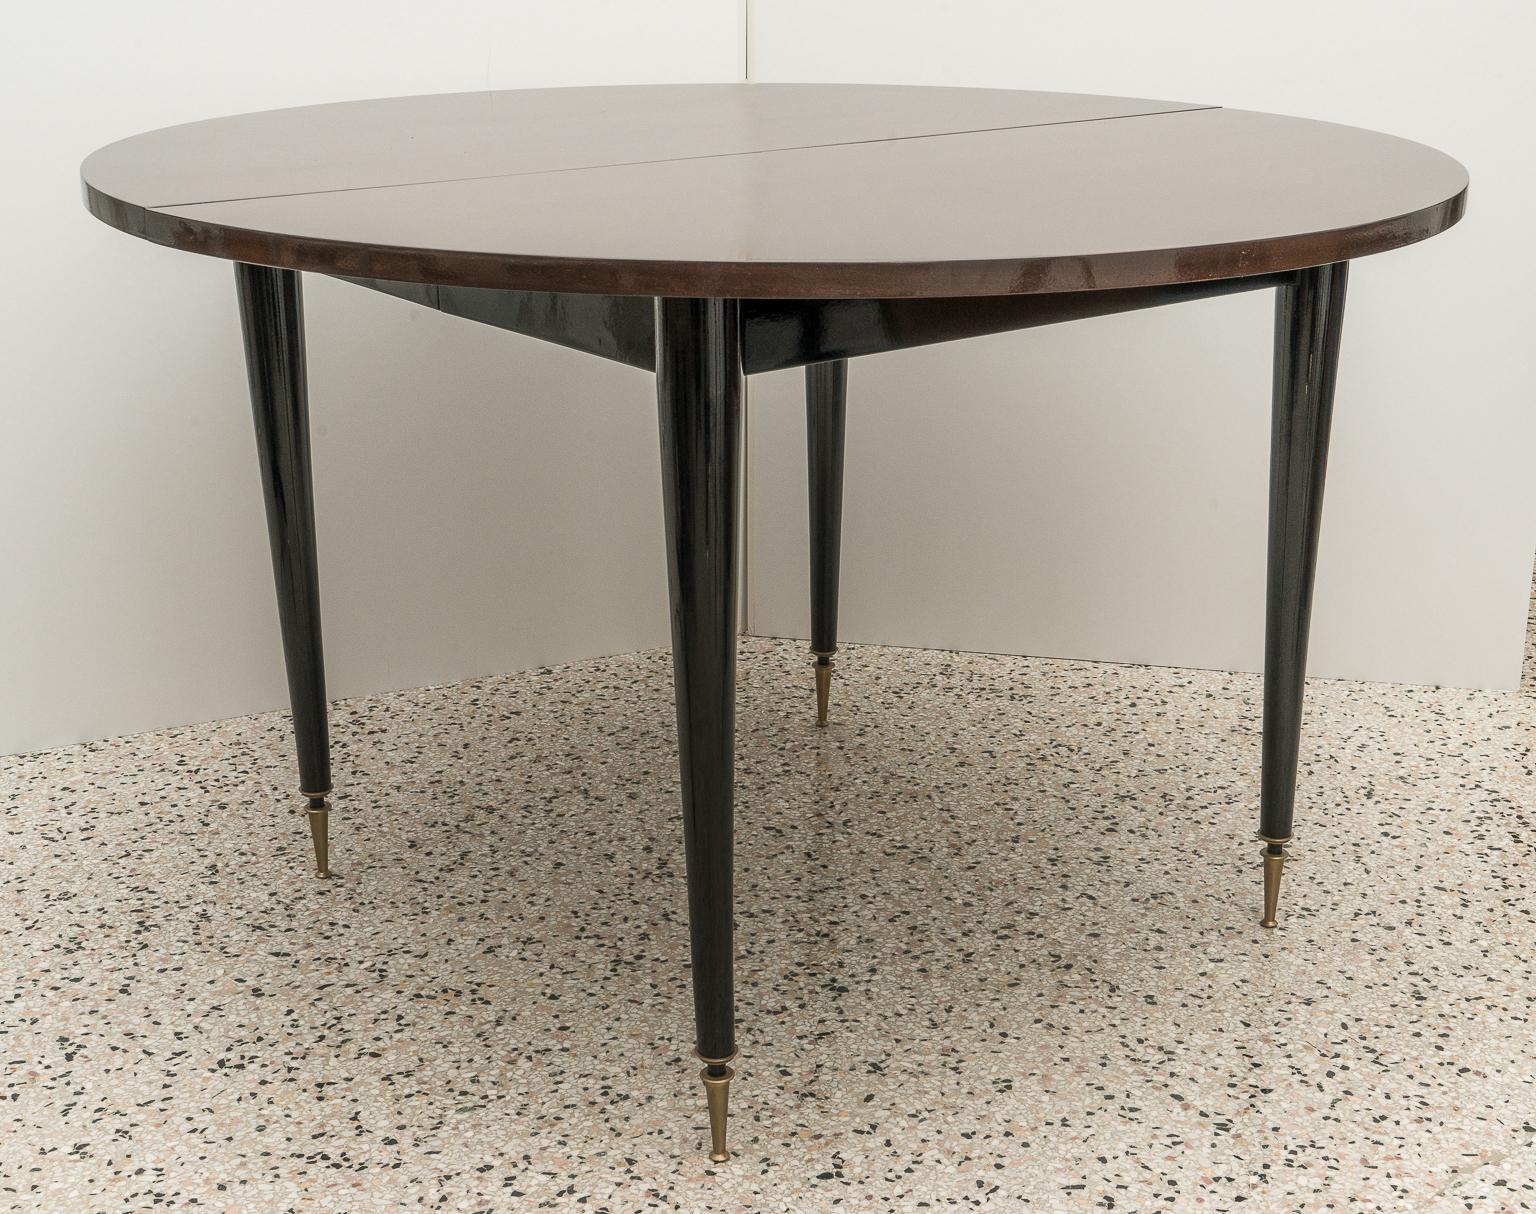 20th Century French Art Deco Moderne Round Dining Table